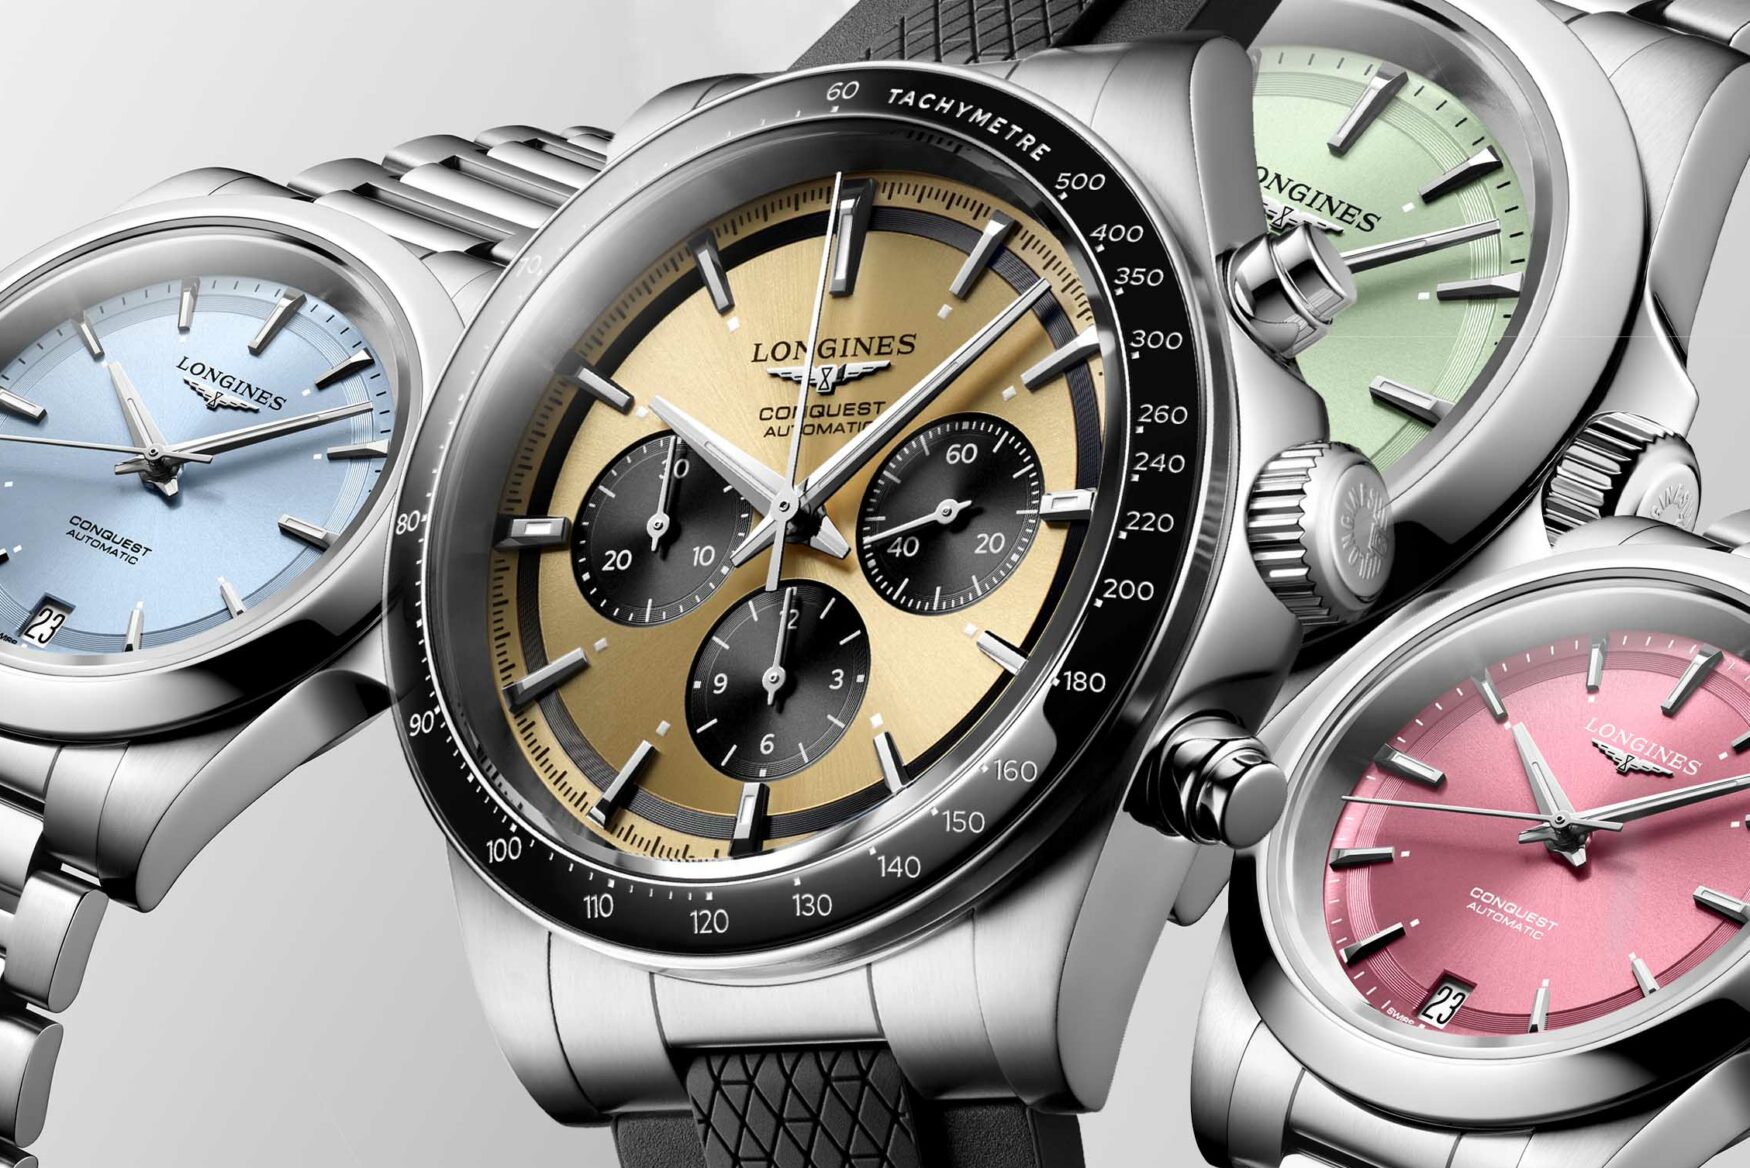 Longines drops 30 new references for the Conquest collection’s 70th anniversary